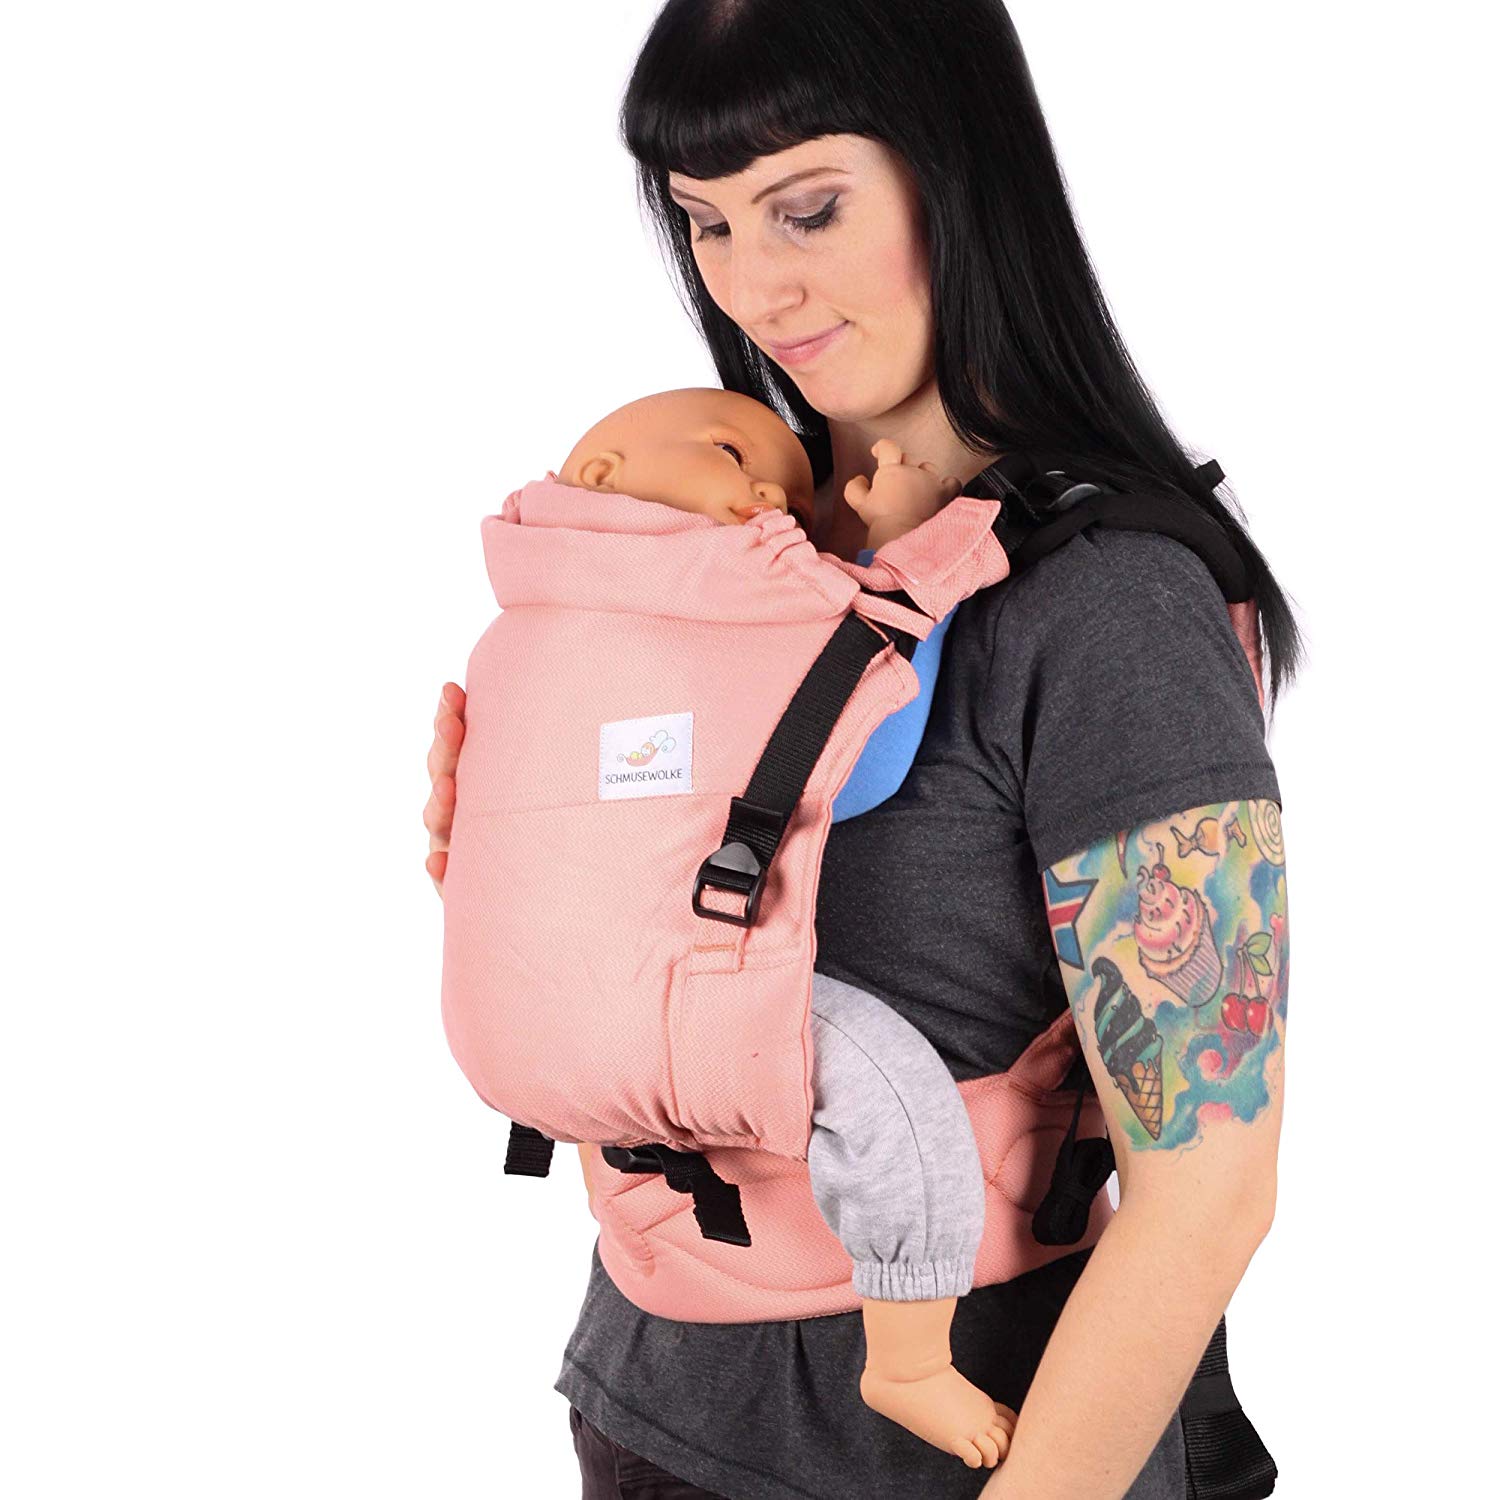 Schmusewolke Baby Carrier For Newborns And Toddlers With Organic Cotton And Comfort Full Buckle, Front and Back Carrier